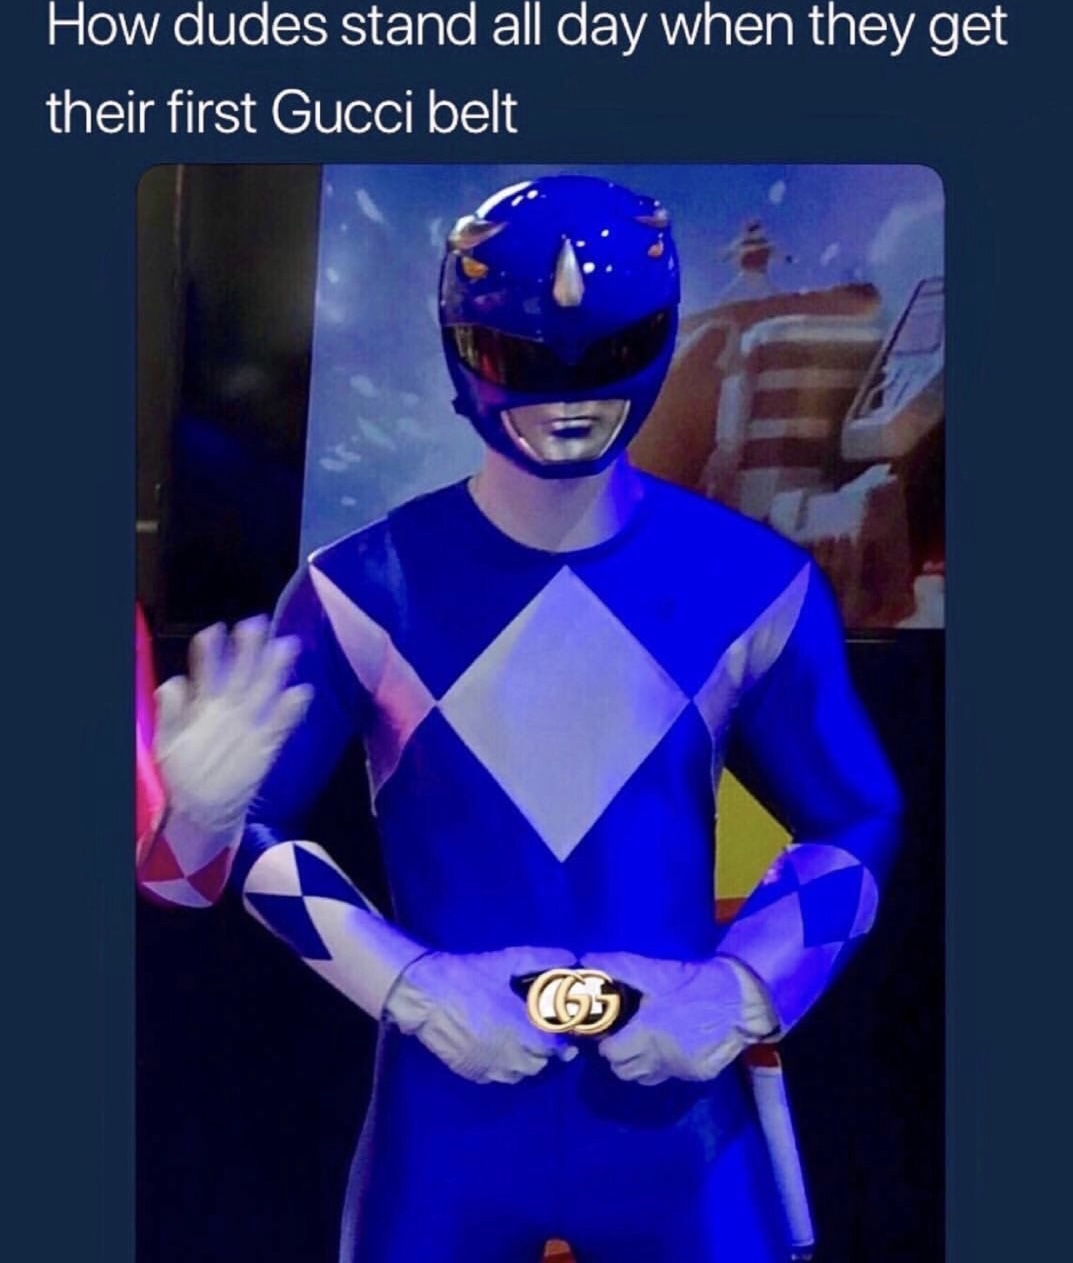 memes - gucci belt meme - How dudes stand all day when they get their first Gucci belt 6